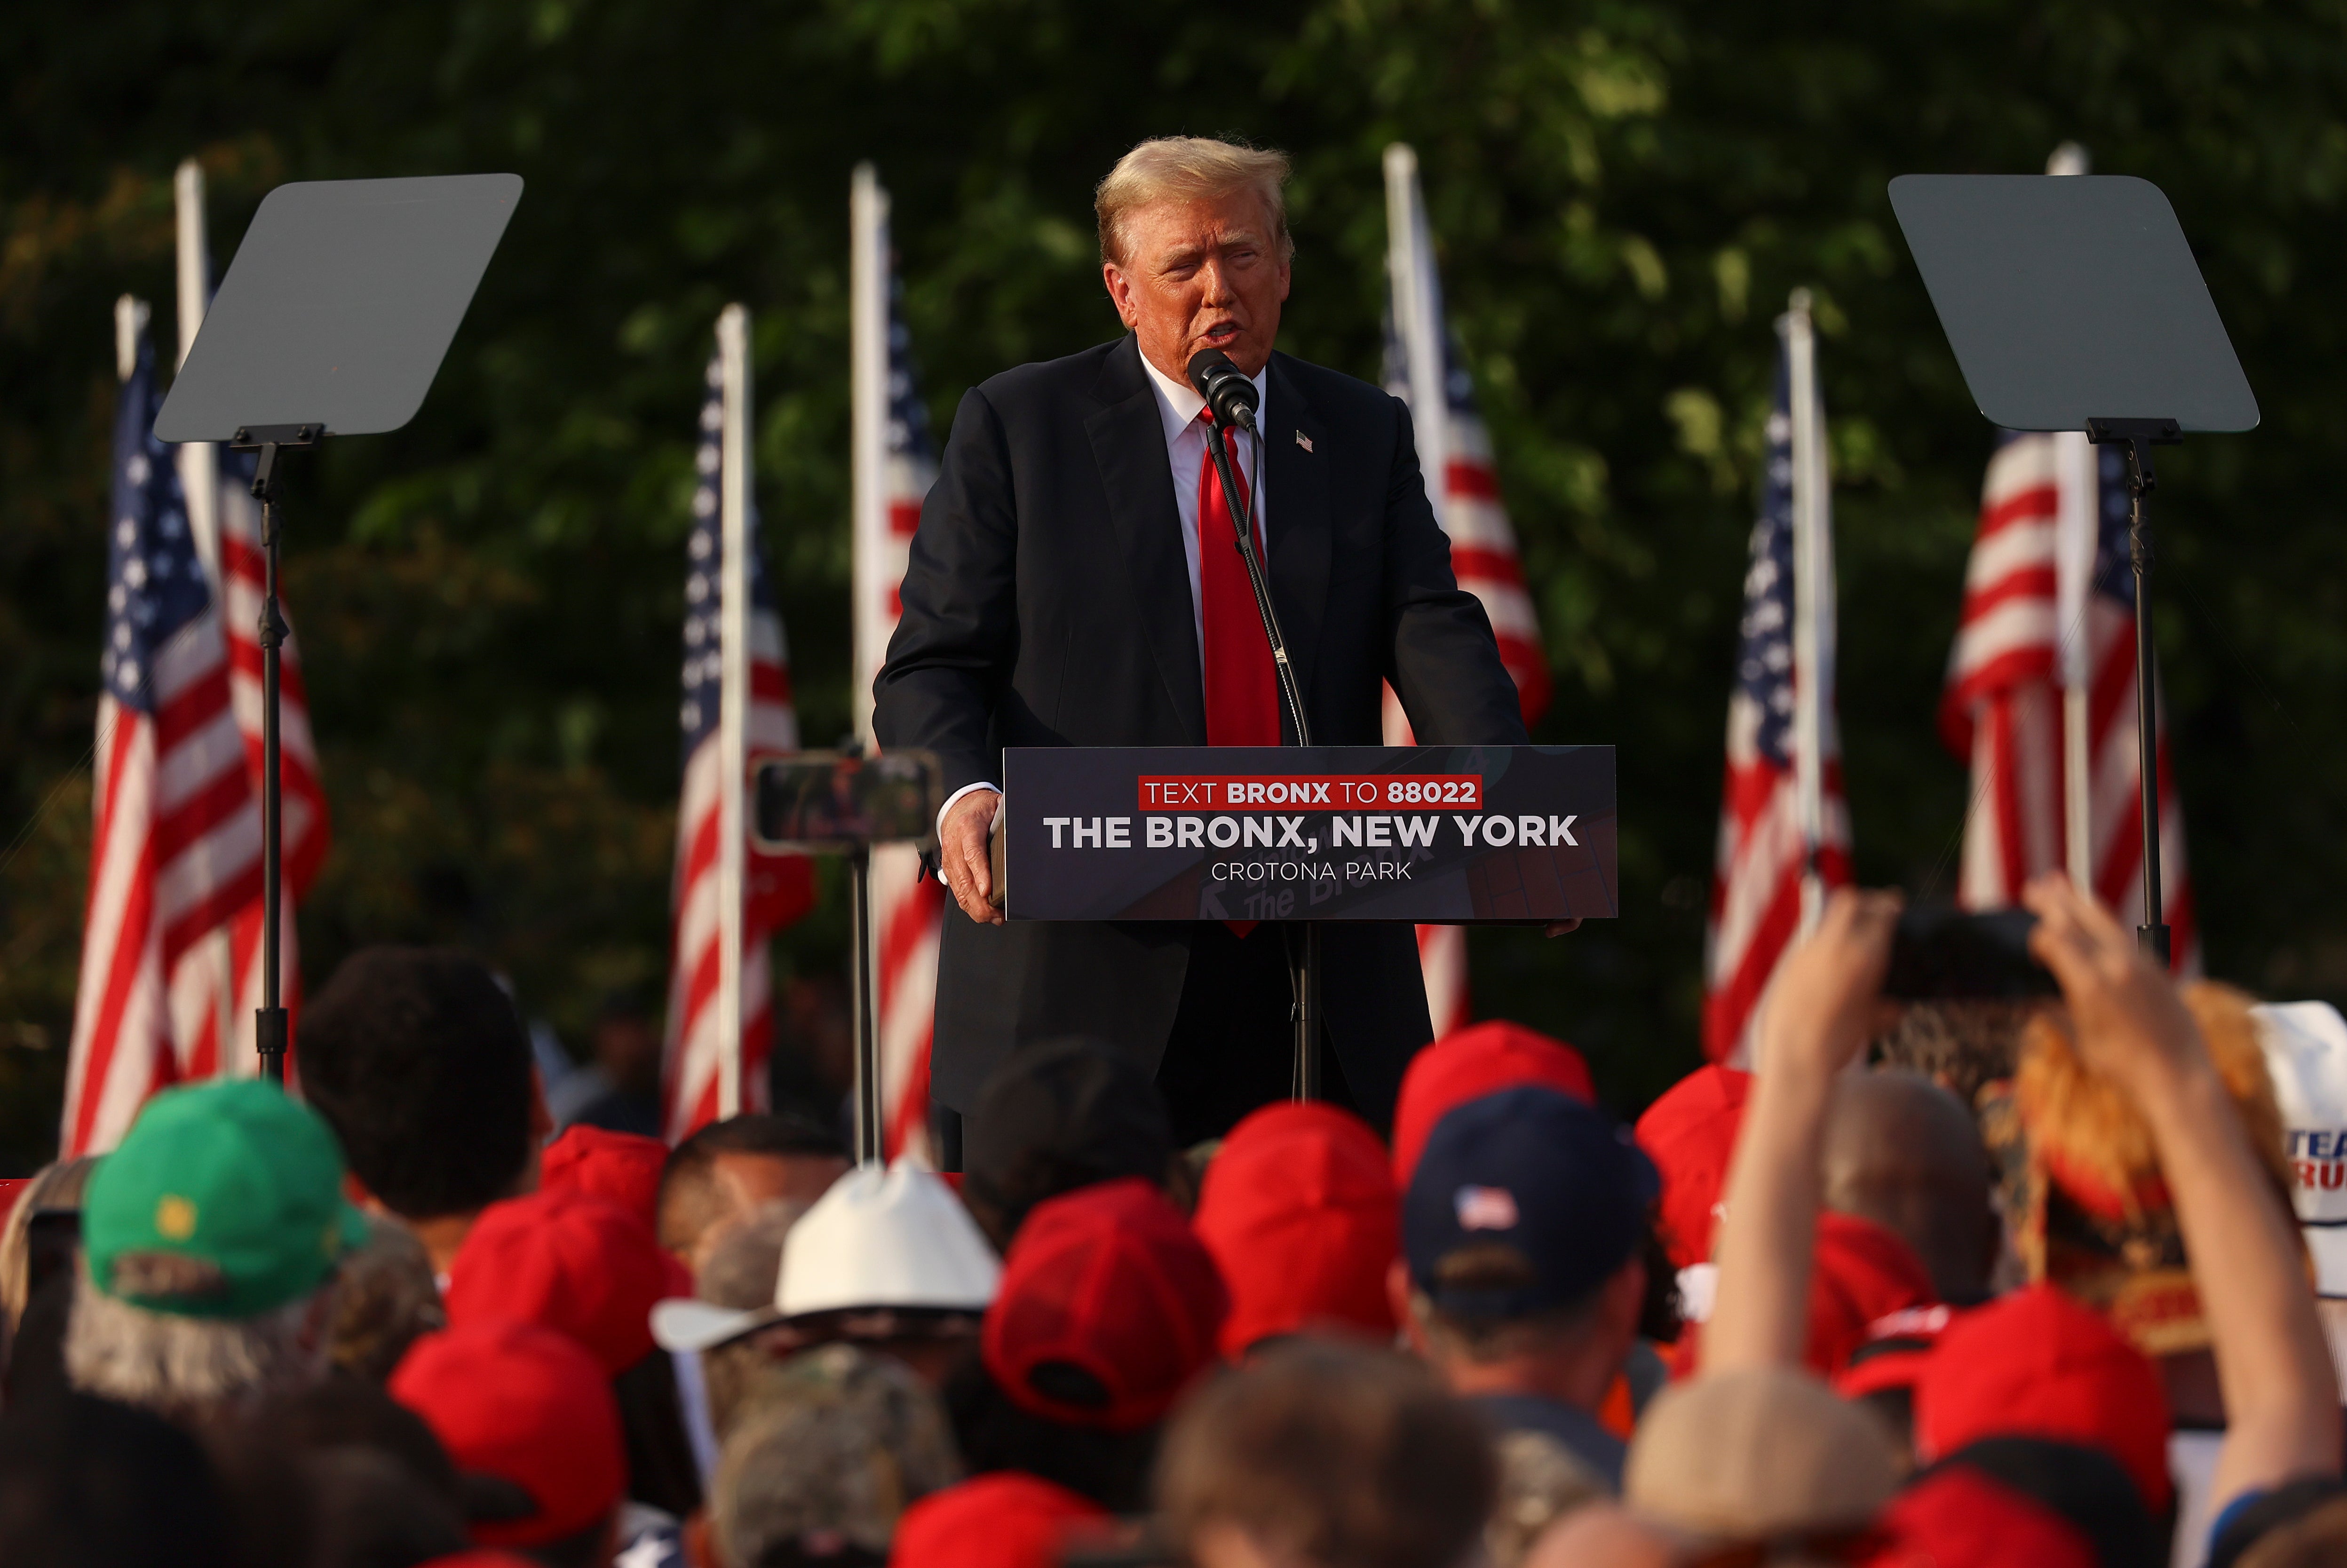 Former President Donald Trump speaks at a rally in the Bronx borough of New York